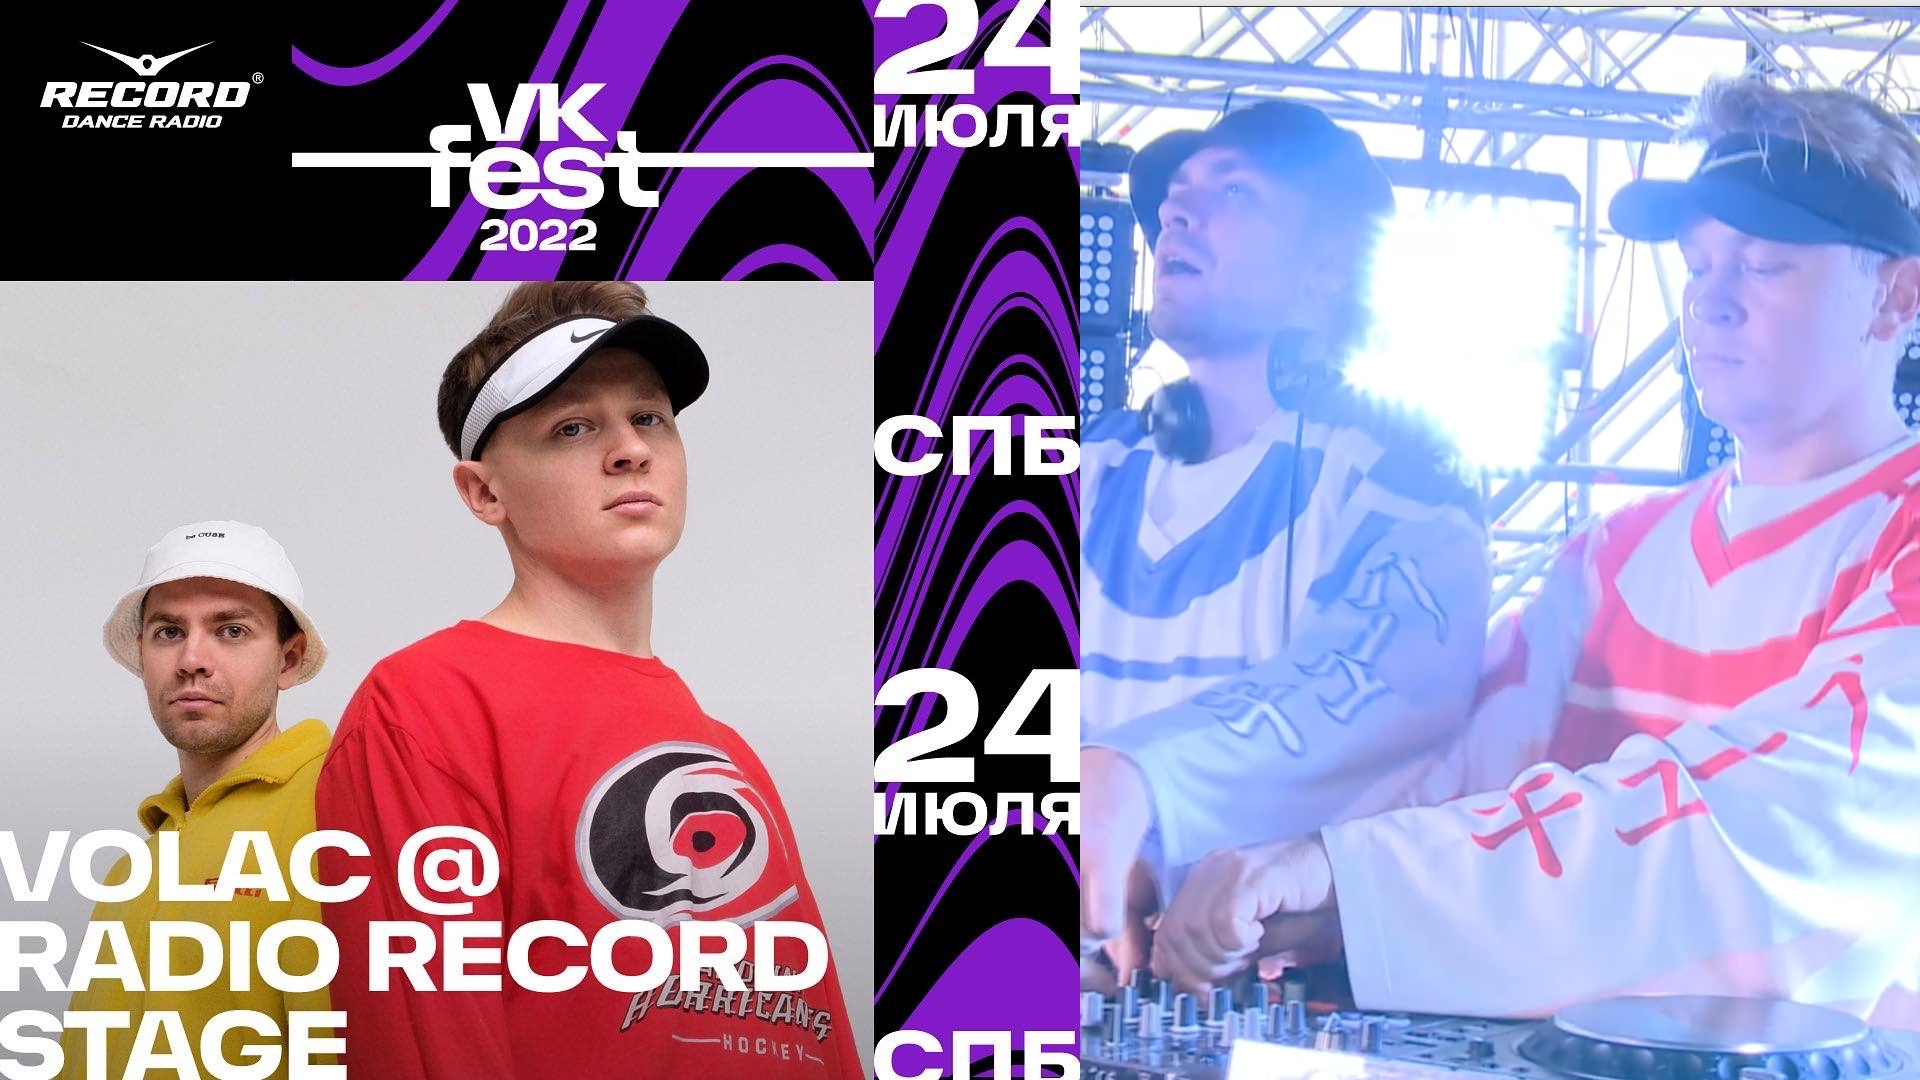 Volac @ Record Dance Stage | VK Fest 2022